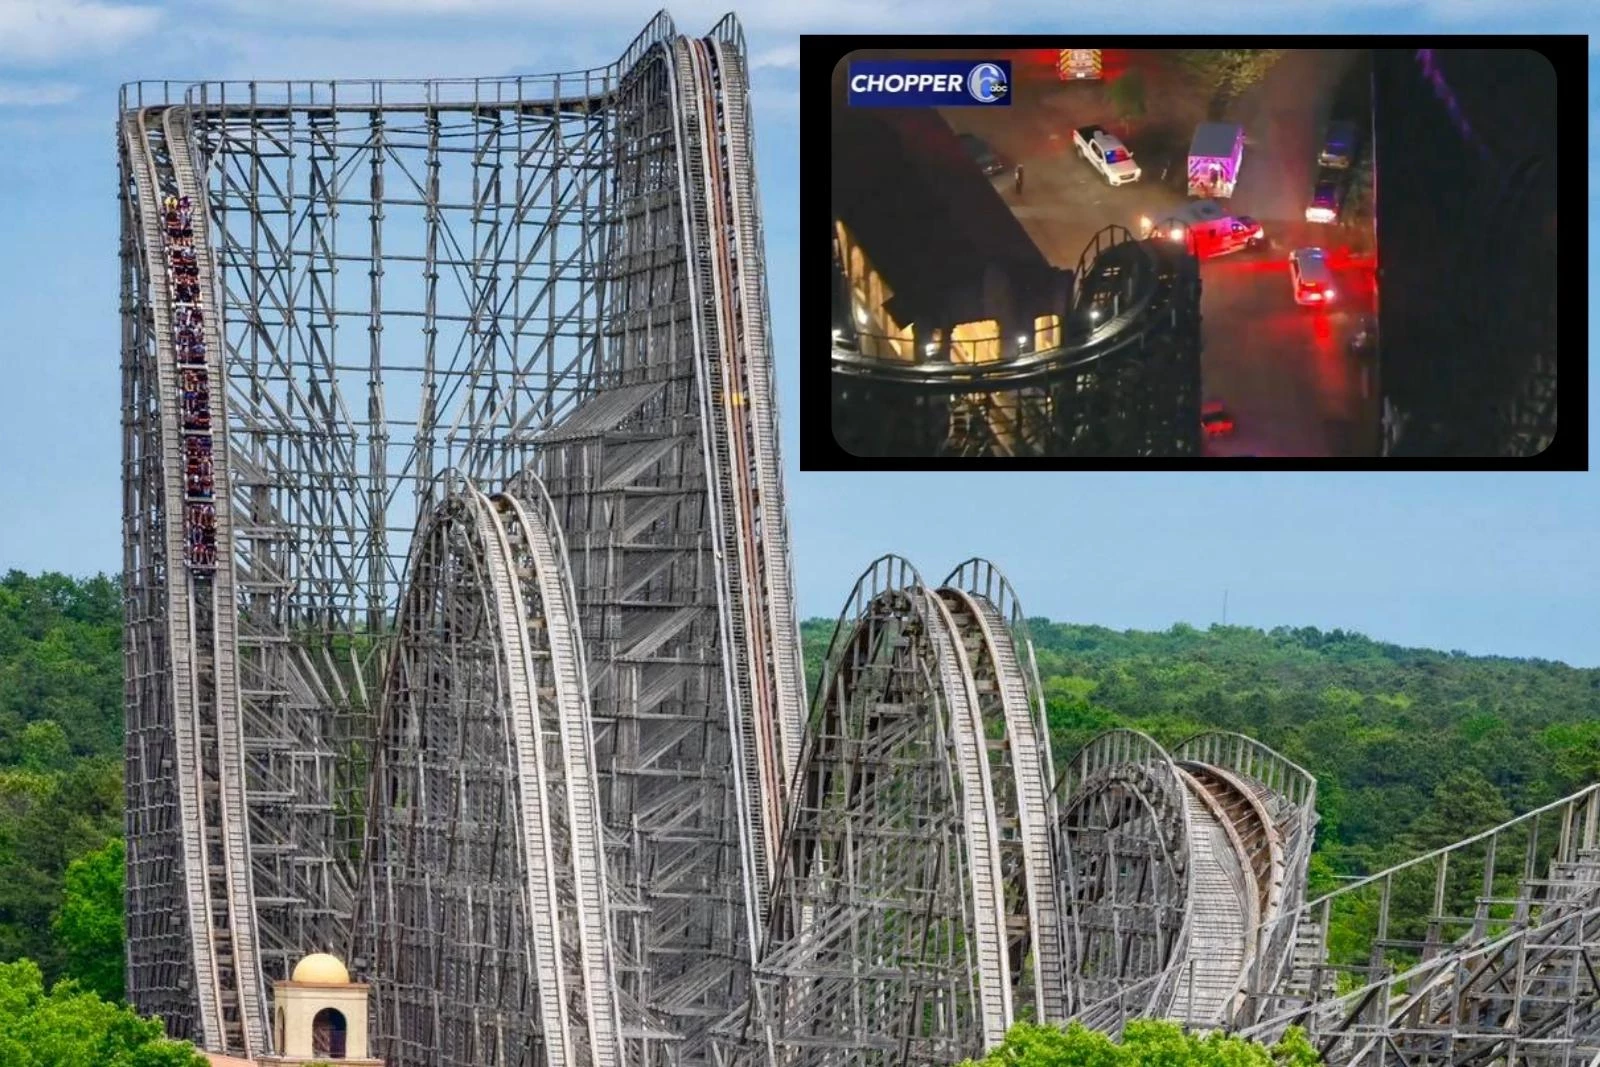 UPDATE: 13 Riders Injured on El Toro Roller Coaster at Six Flags Great  Adventure in Jackson, NJ Thursday Evening